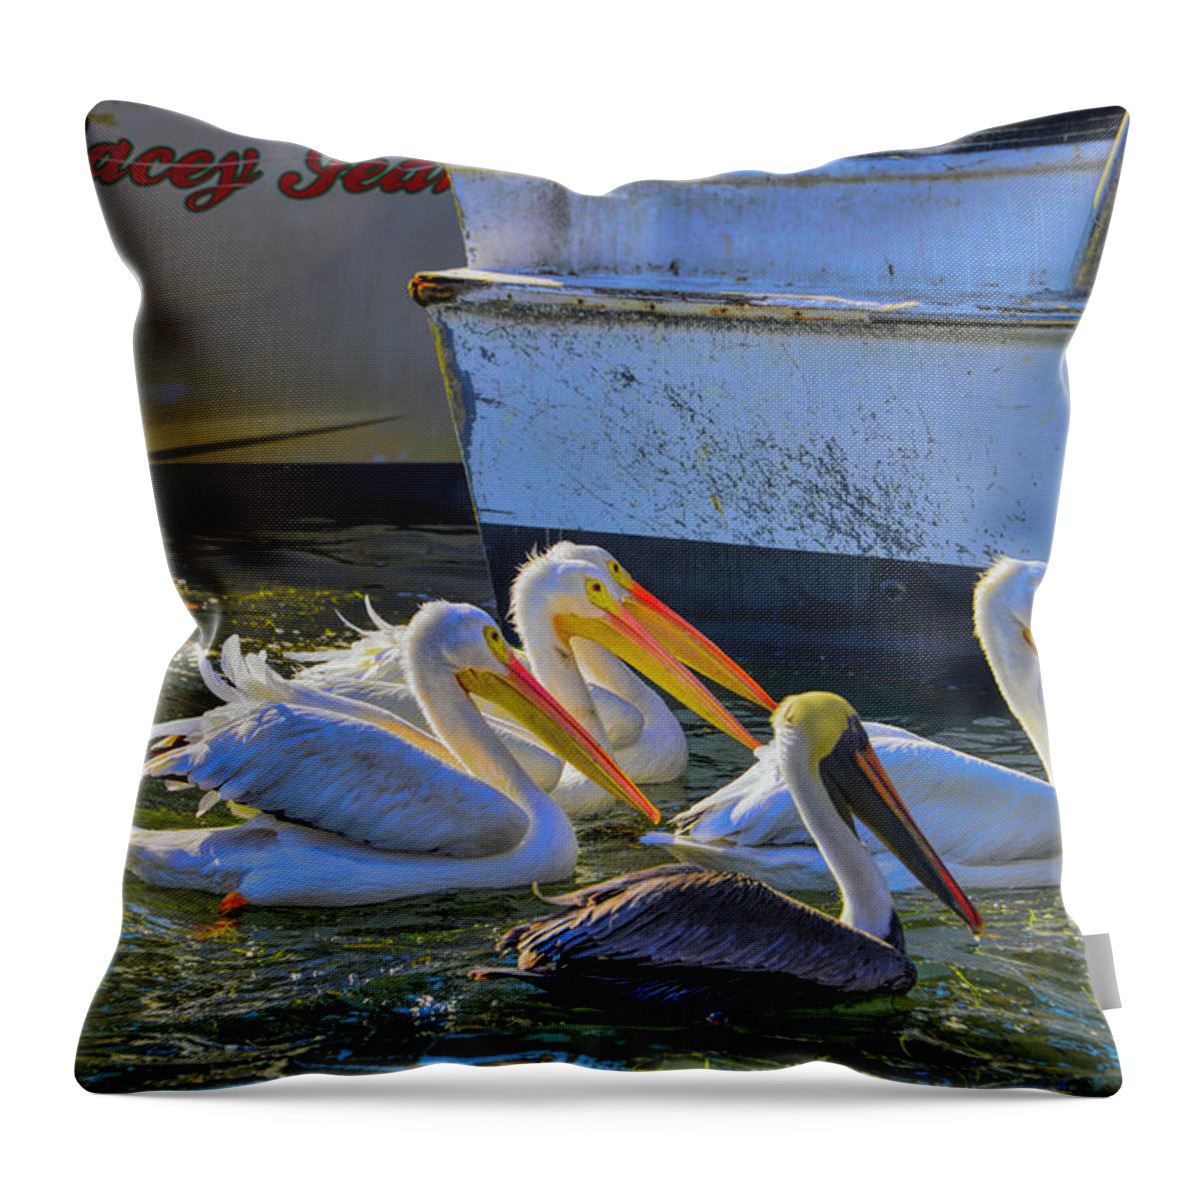 White Pelicans Throw Pillow featuring the photograph Out Shopping by Alison Belsan Horton